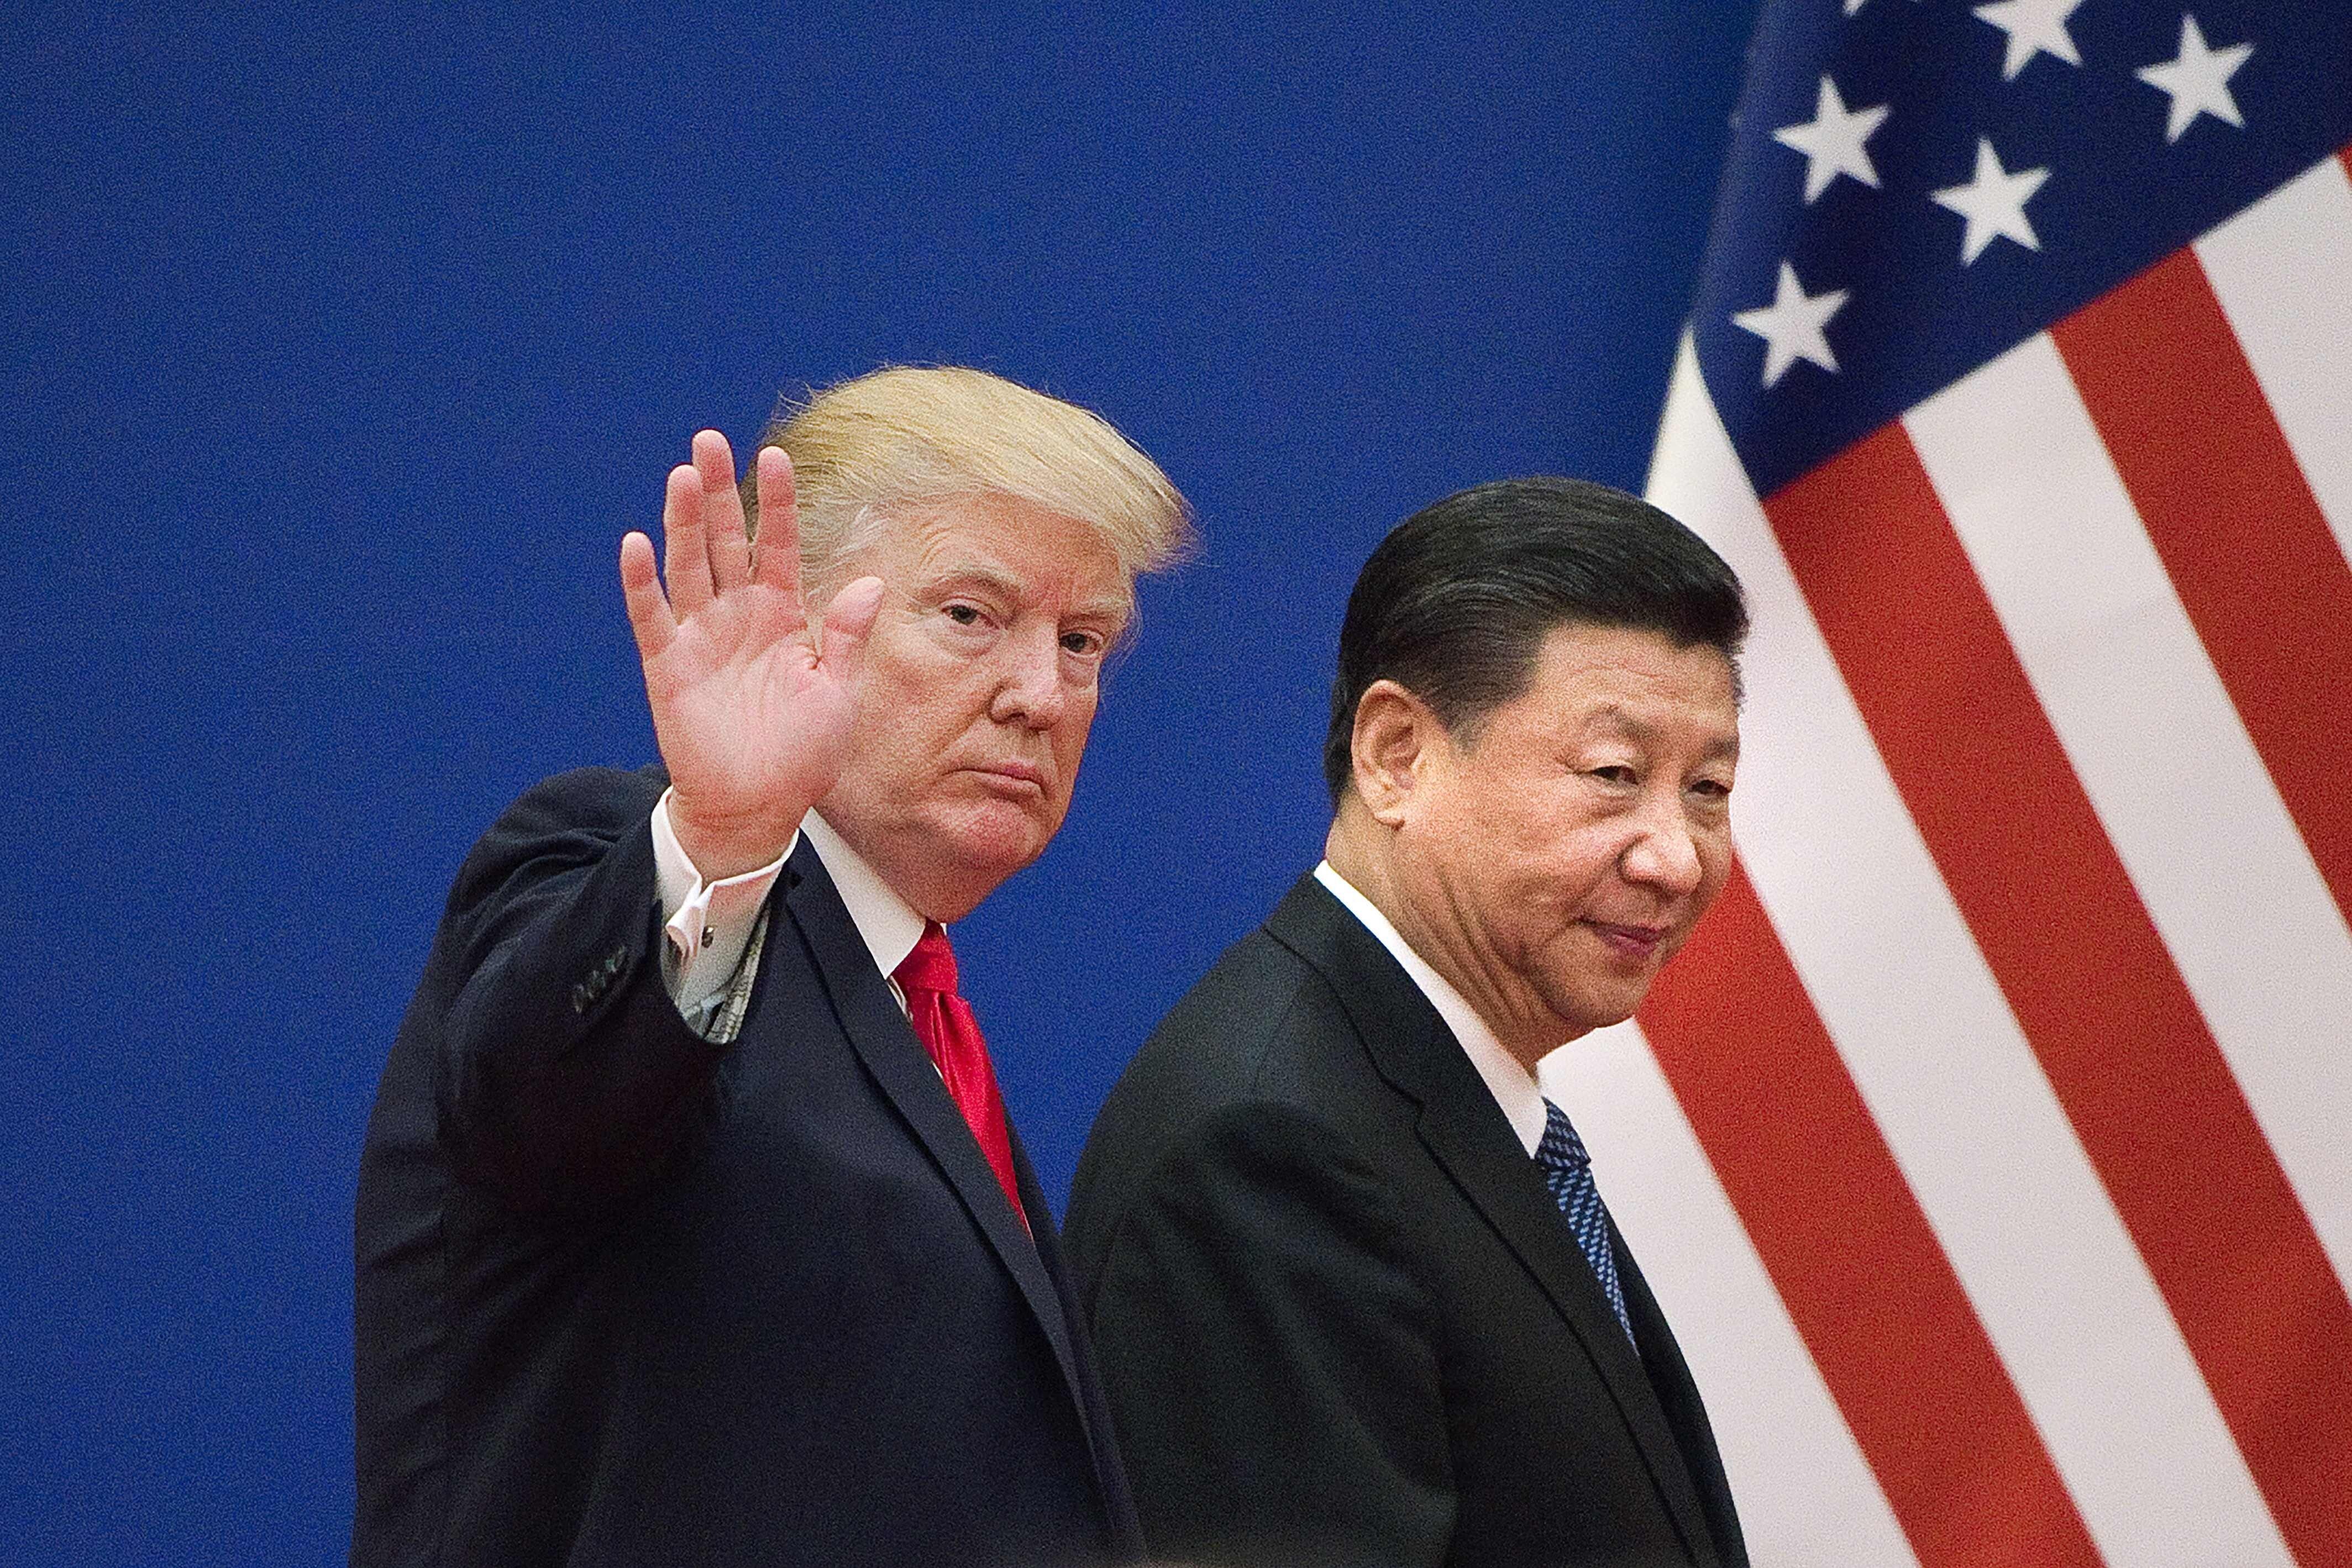 US President Donald Trump and China's President Xi Jinping are pictured together in 2017. The rift between the two countries is deep-seated and structural, and will not go away, even if Trump is not re-elected in November. Photo: AFP